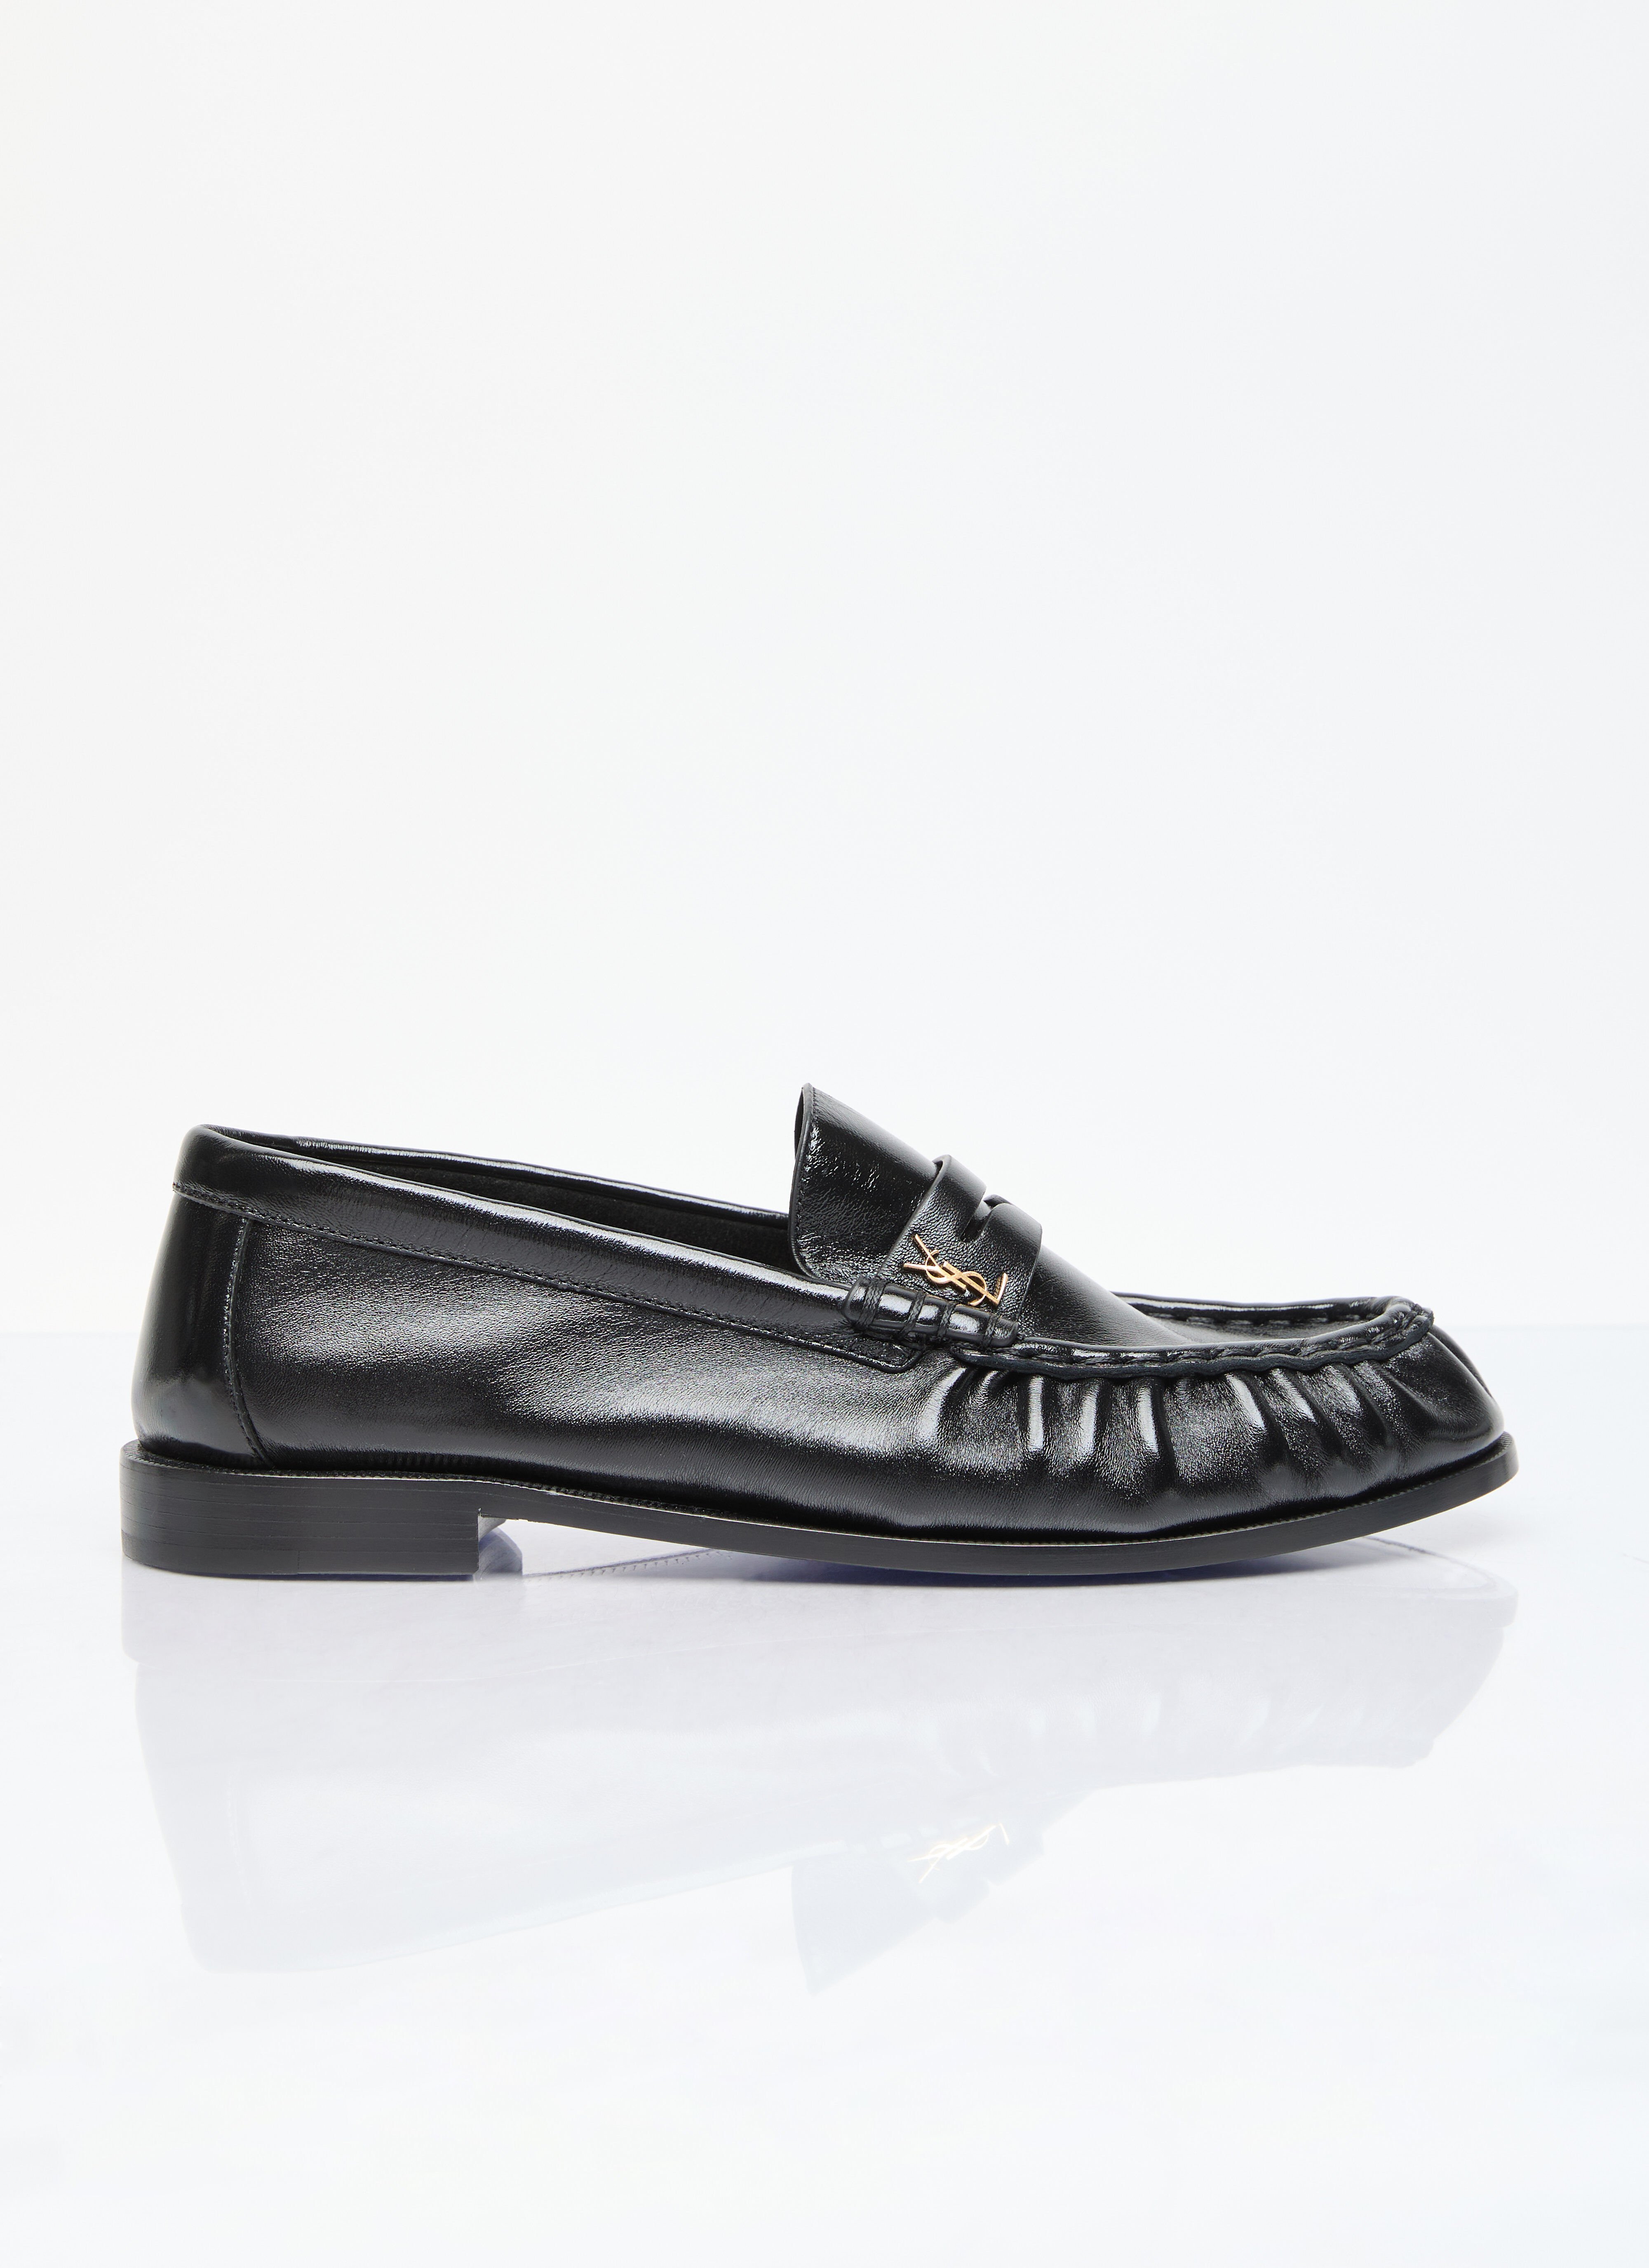 Thom Browne Le Loafer Penney Leather Slippers Black thb0155012